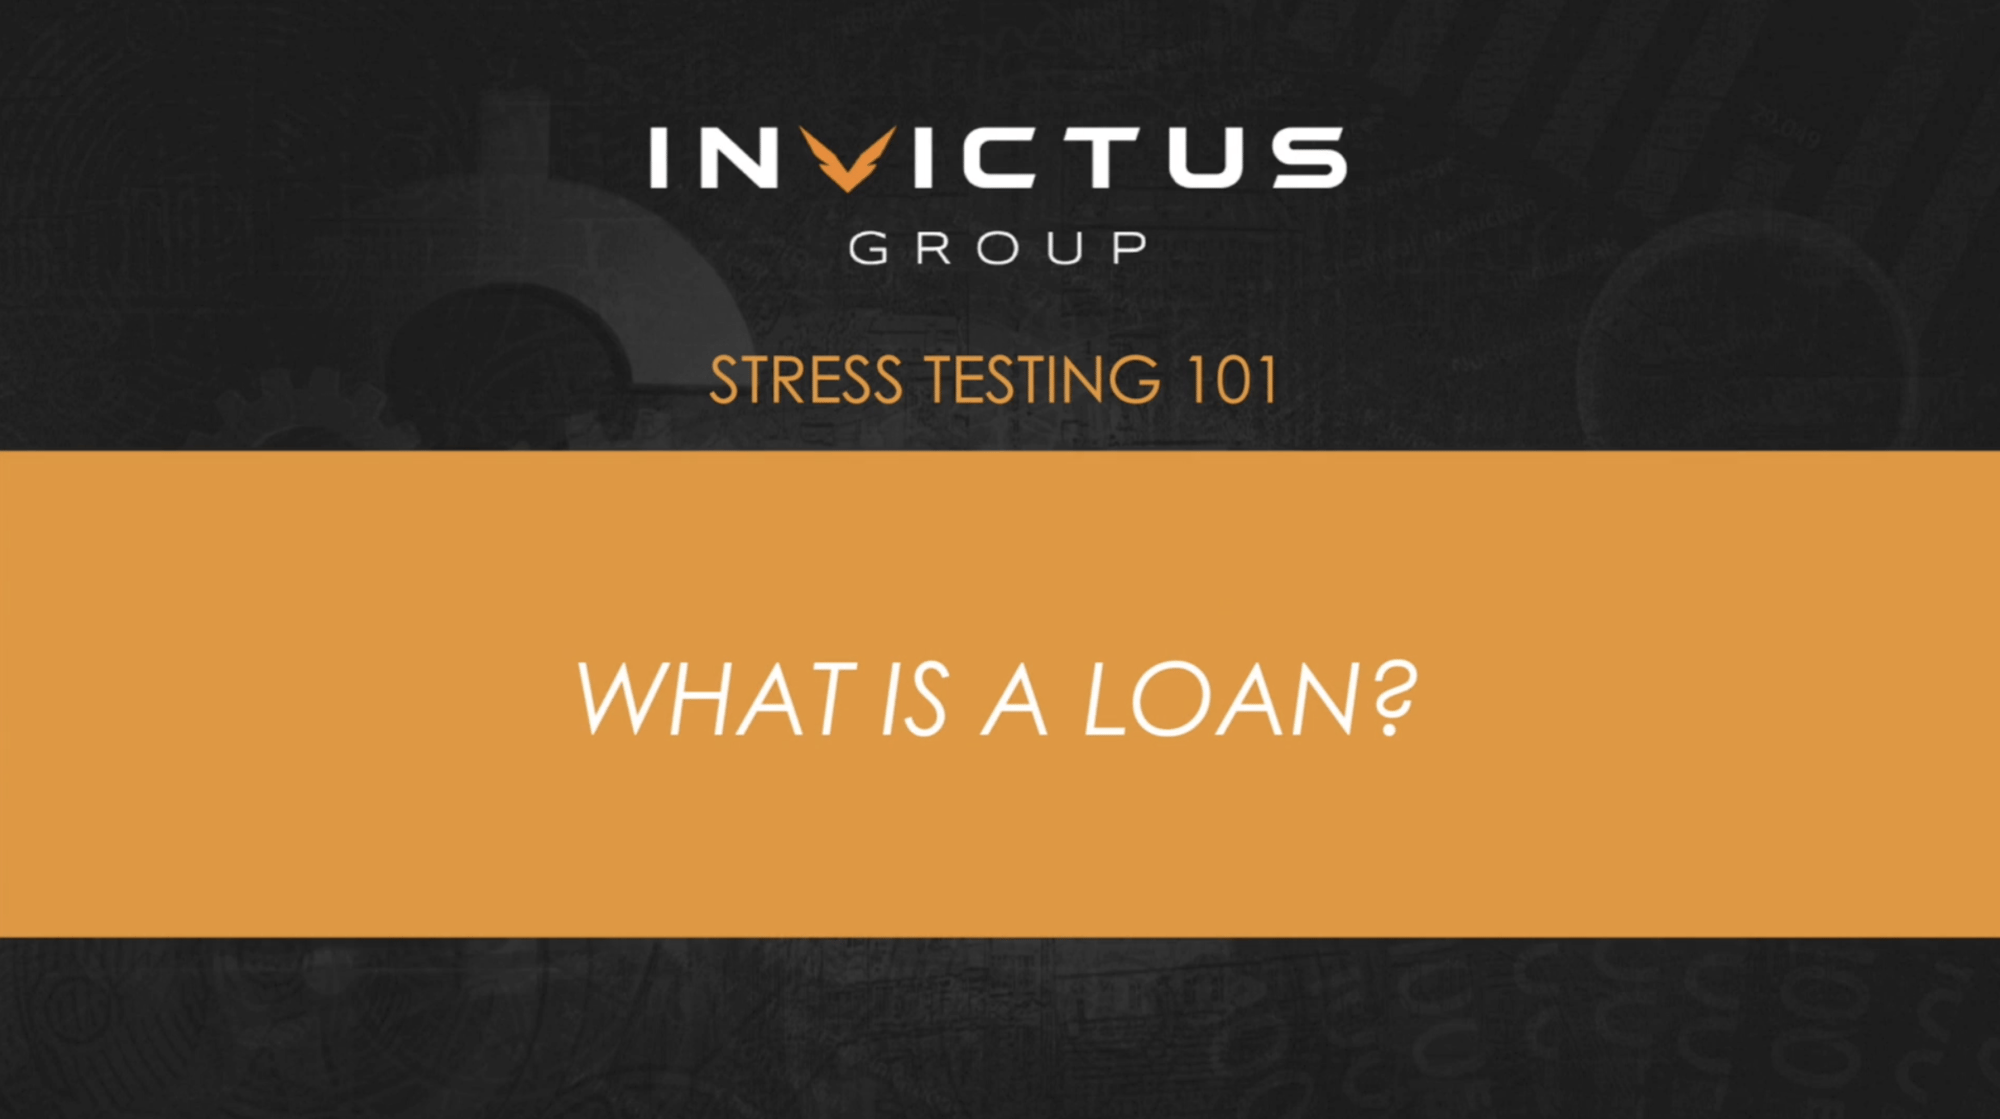 Invictus Group Video - What is a Loan